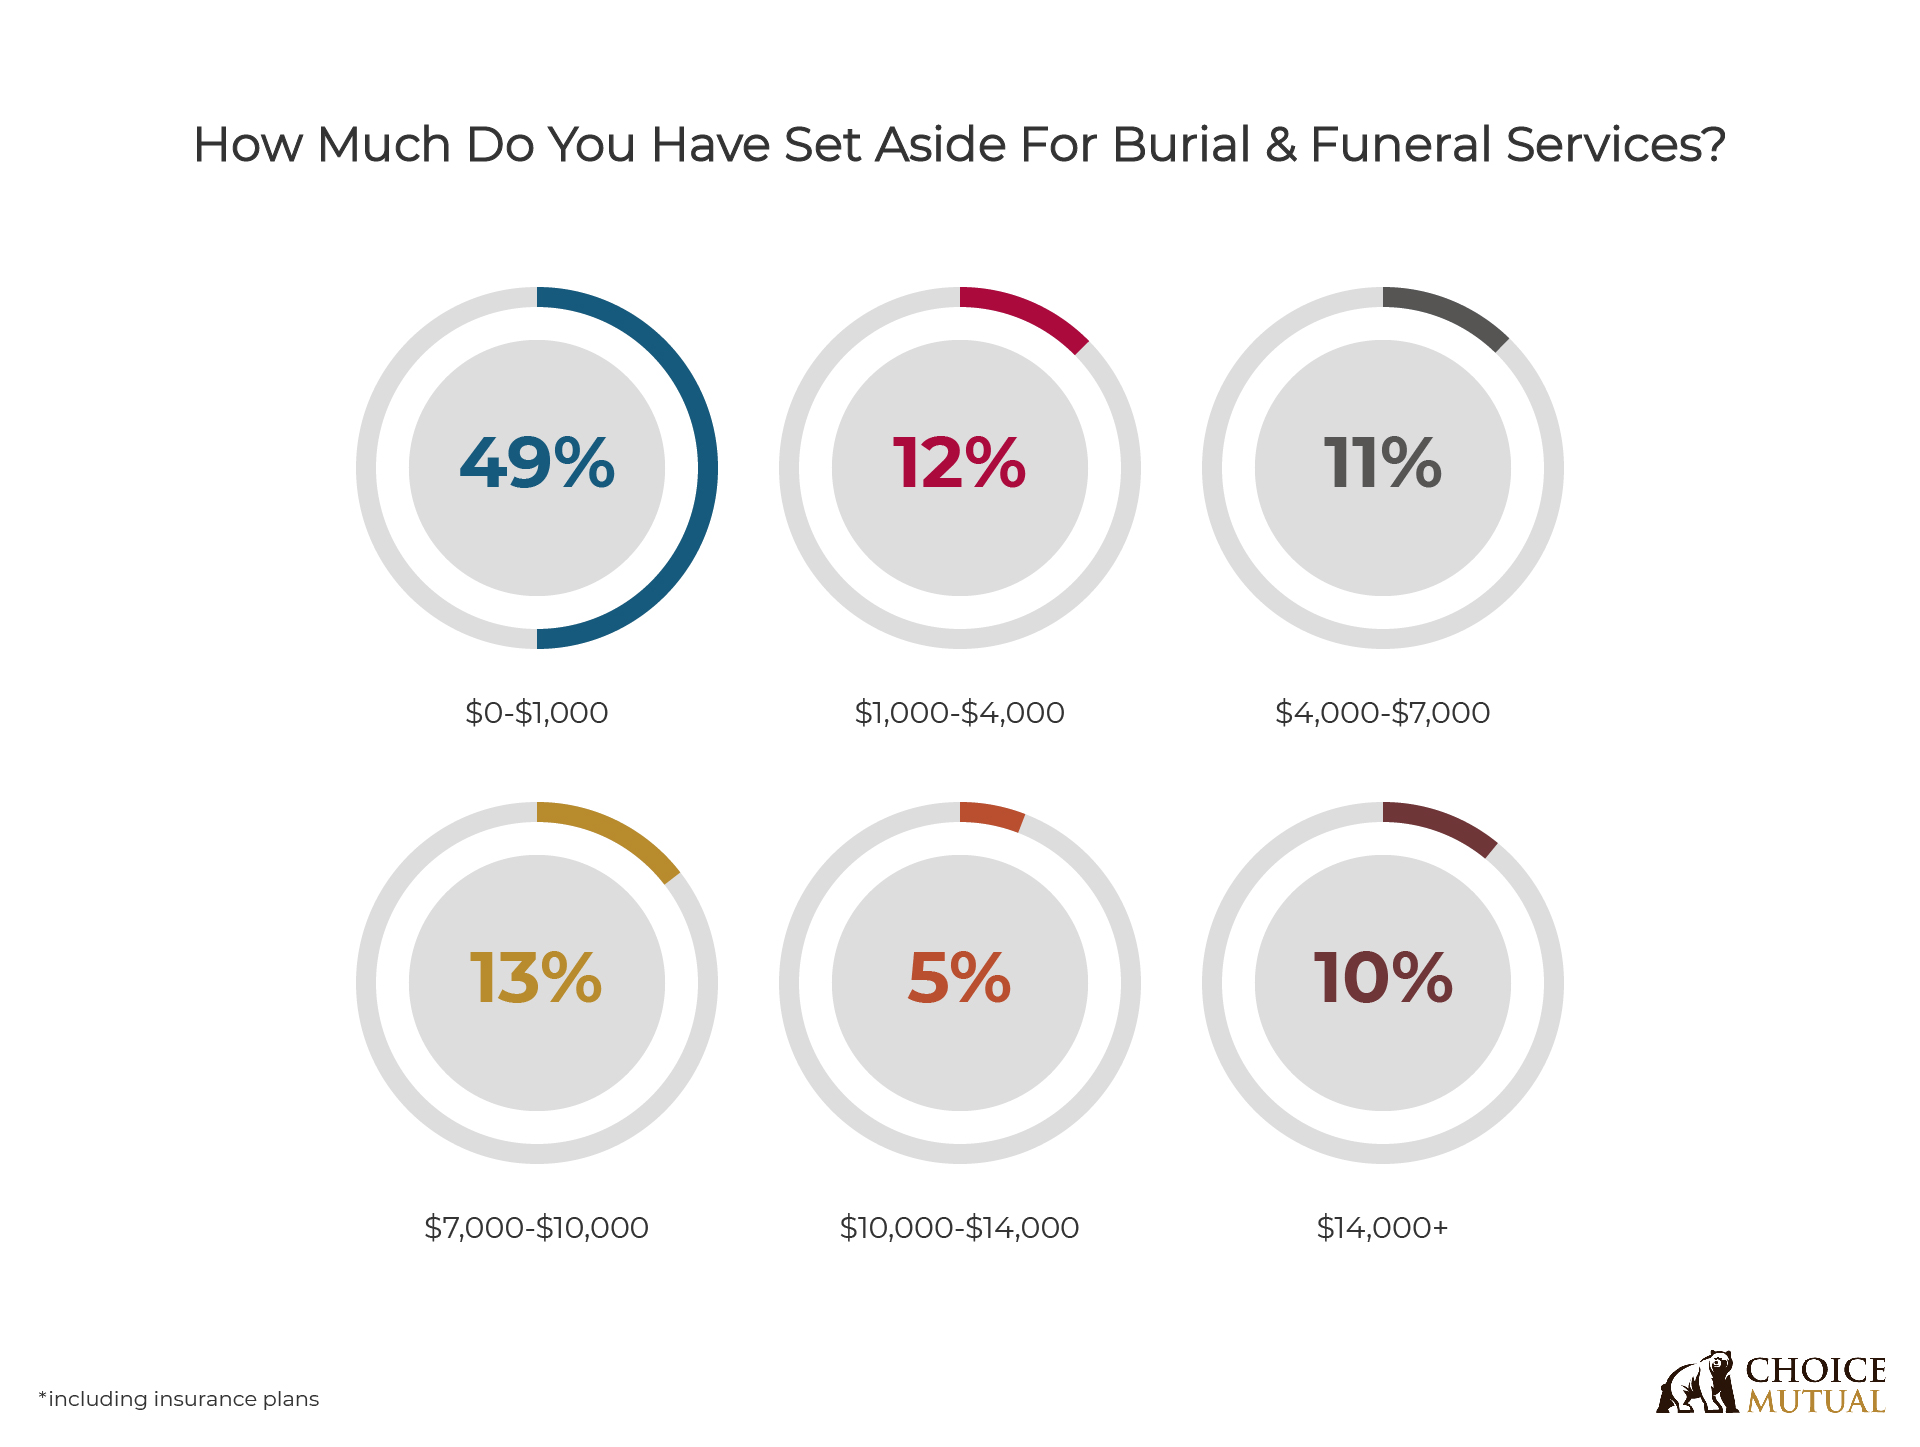 A chart showing how much money people have set aside for funeral costs.